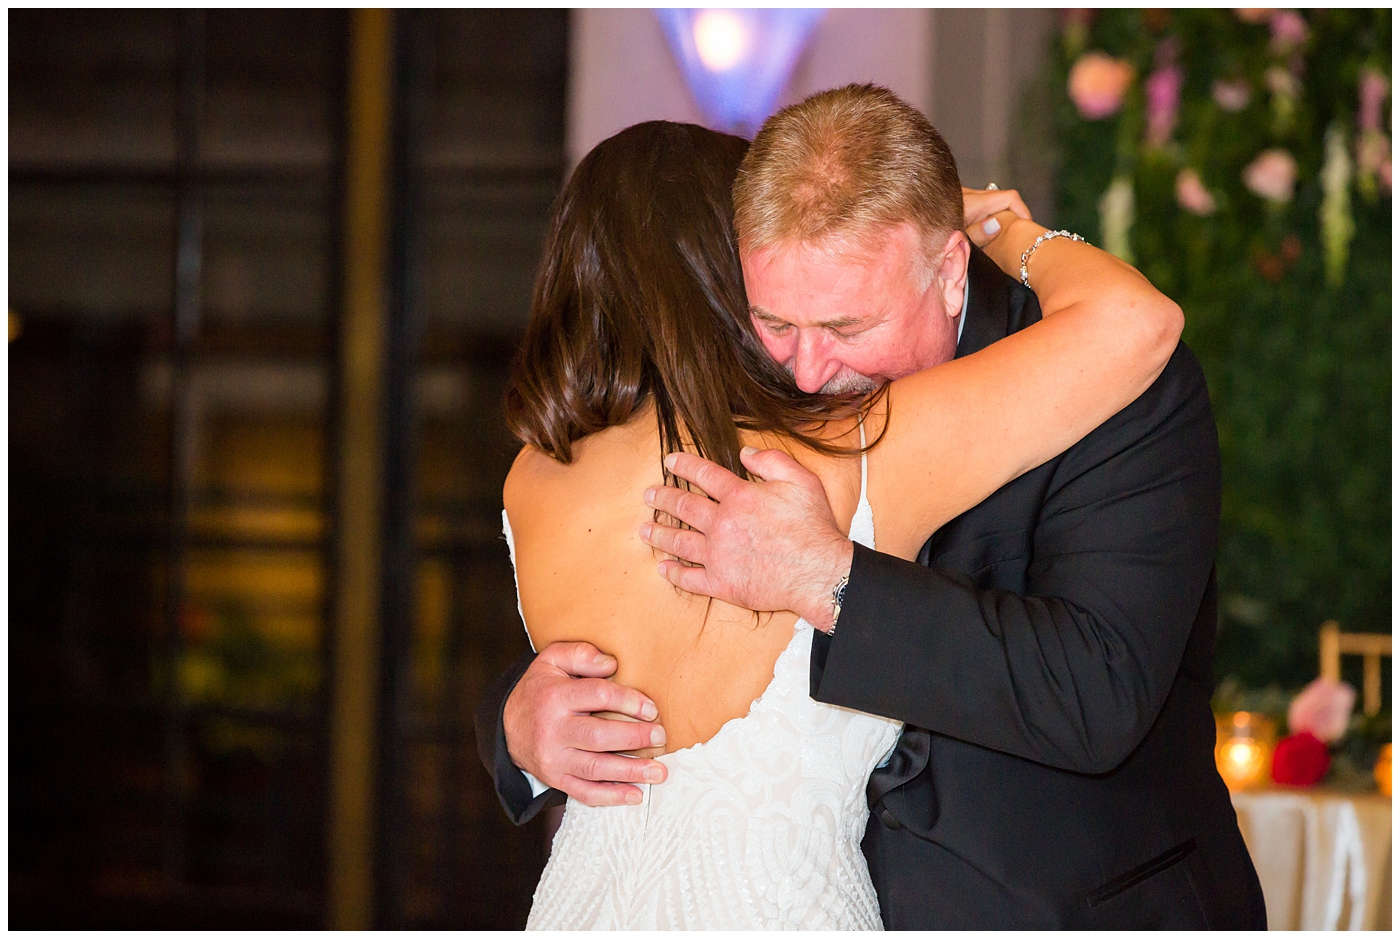 father daughter dance in ballroom reception on wedding day